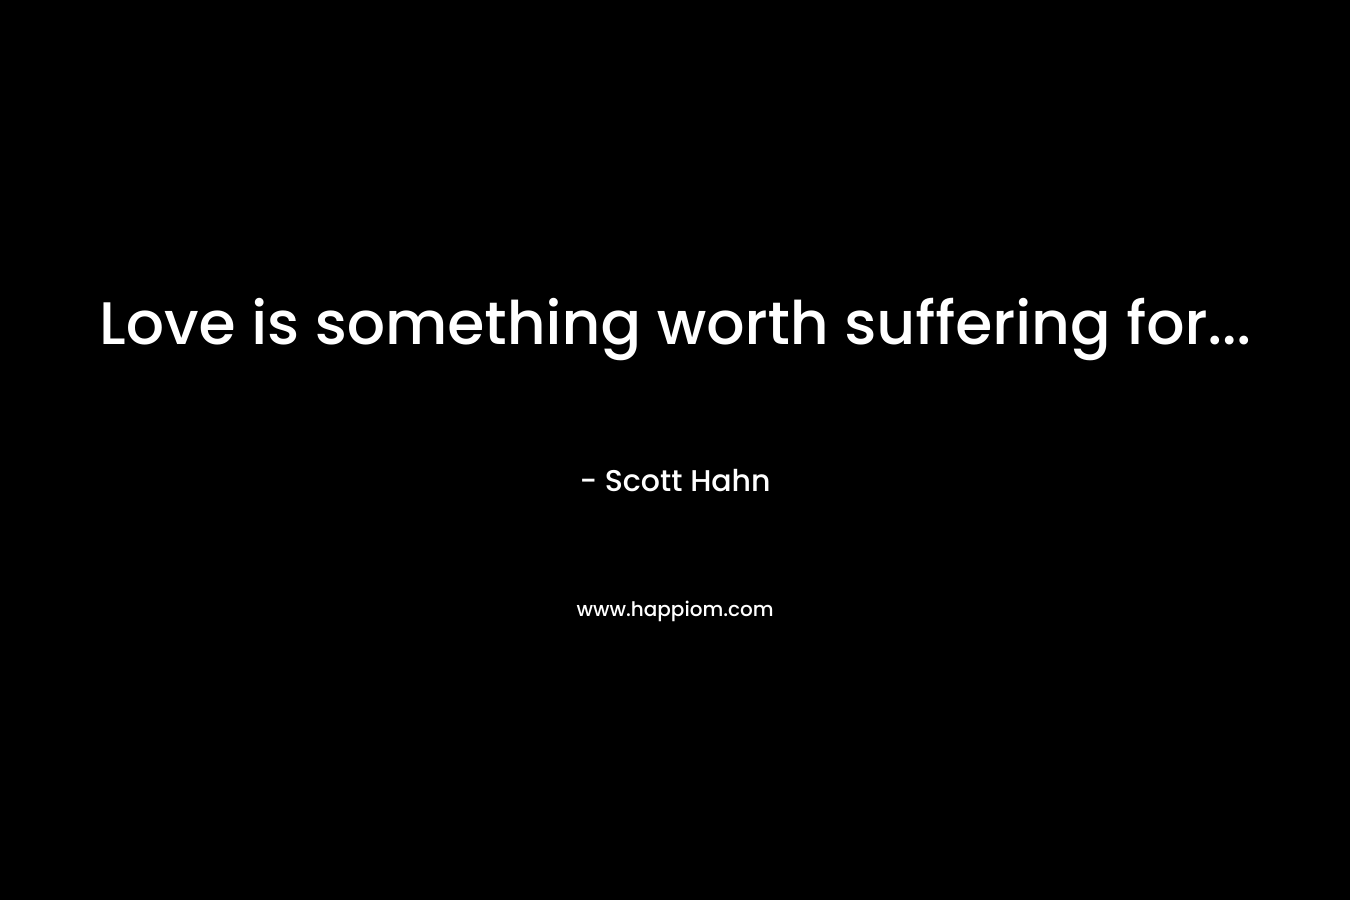 Love is something worth suffering for...